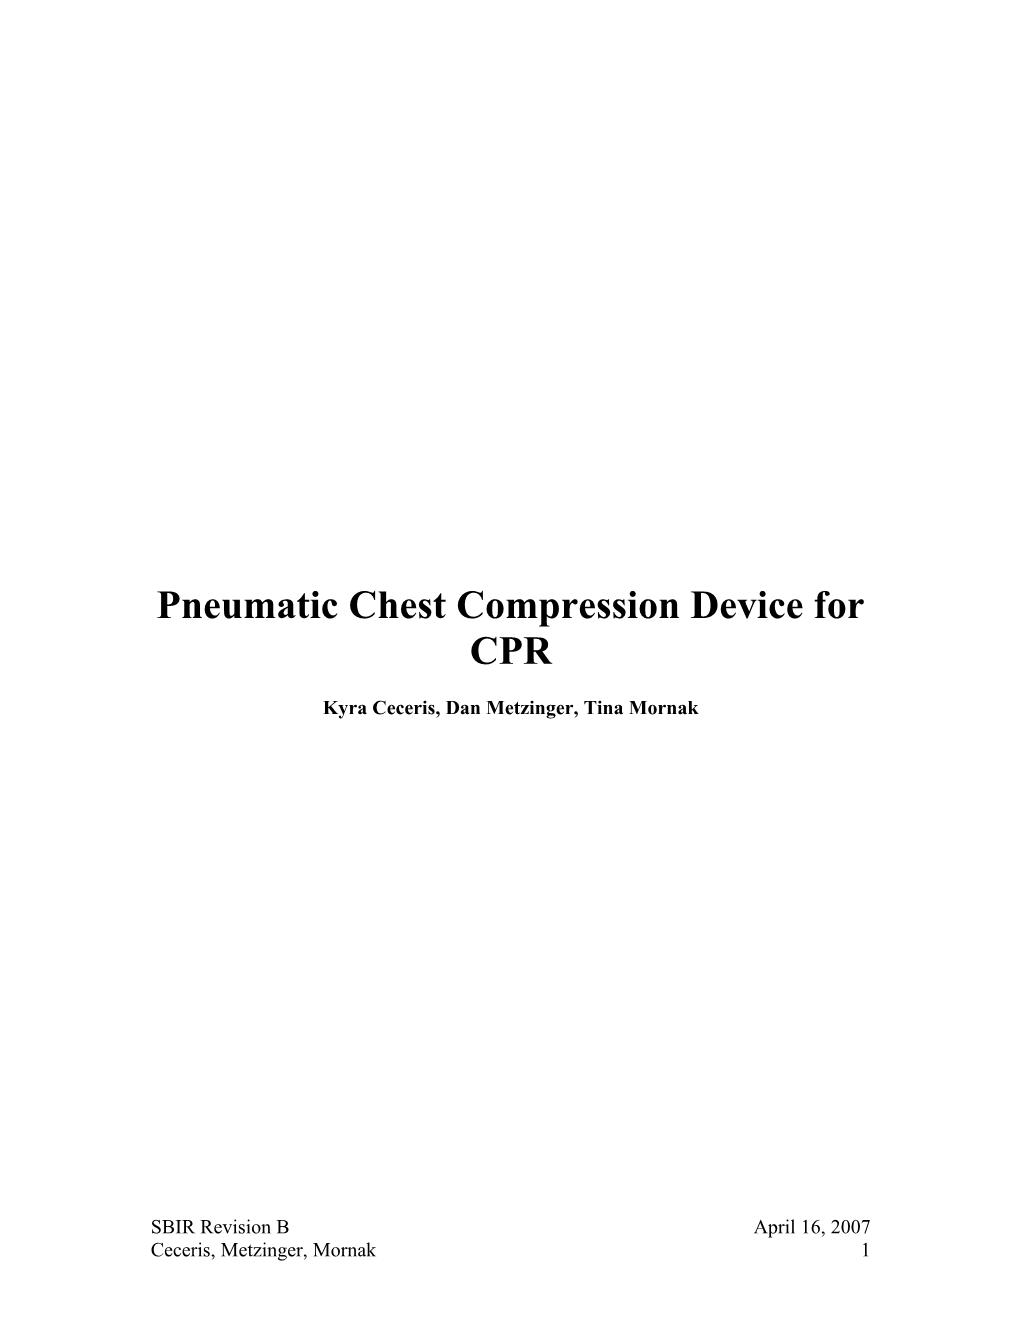 Pneumatic Chest Compression Device for CPR